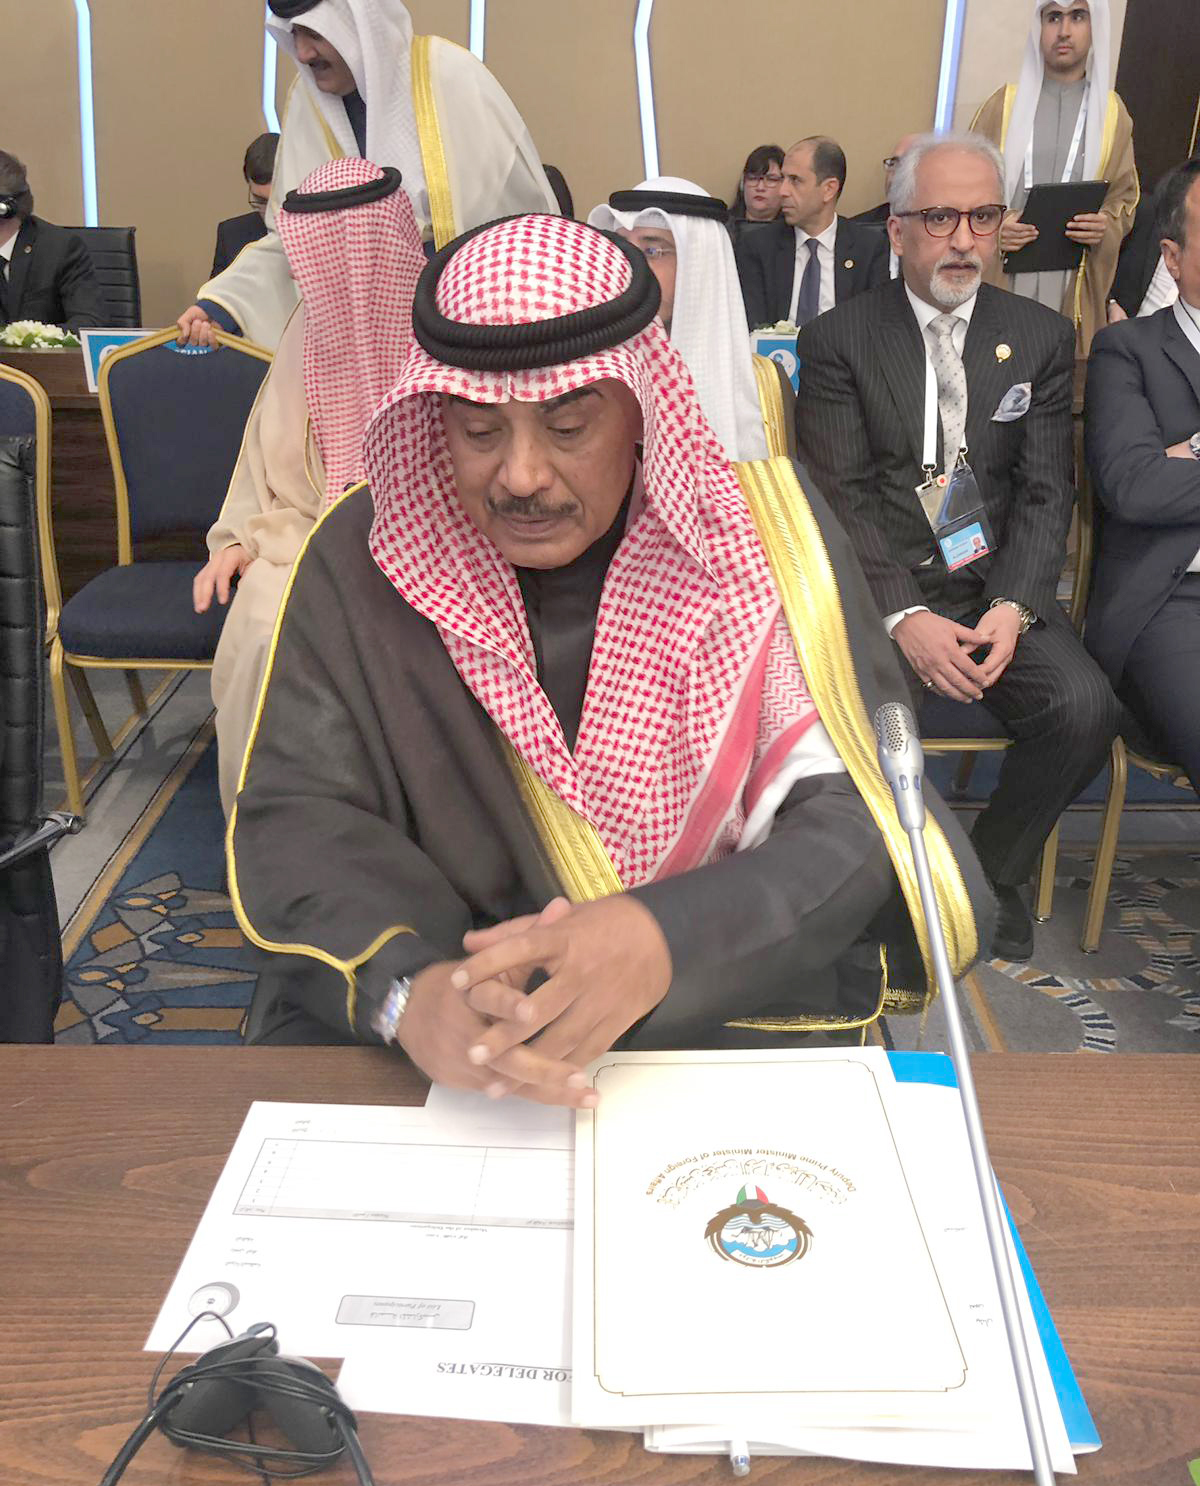 Deputy Prime Minister and Foreign Minister Sheikh Sabah Khaled Al-Hamad Al-Sabah participates in the emergency Islamic meeting